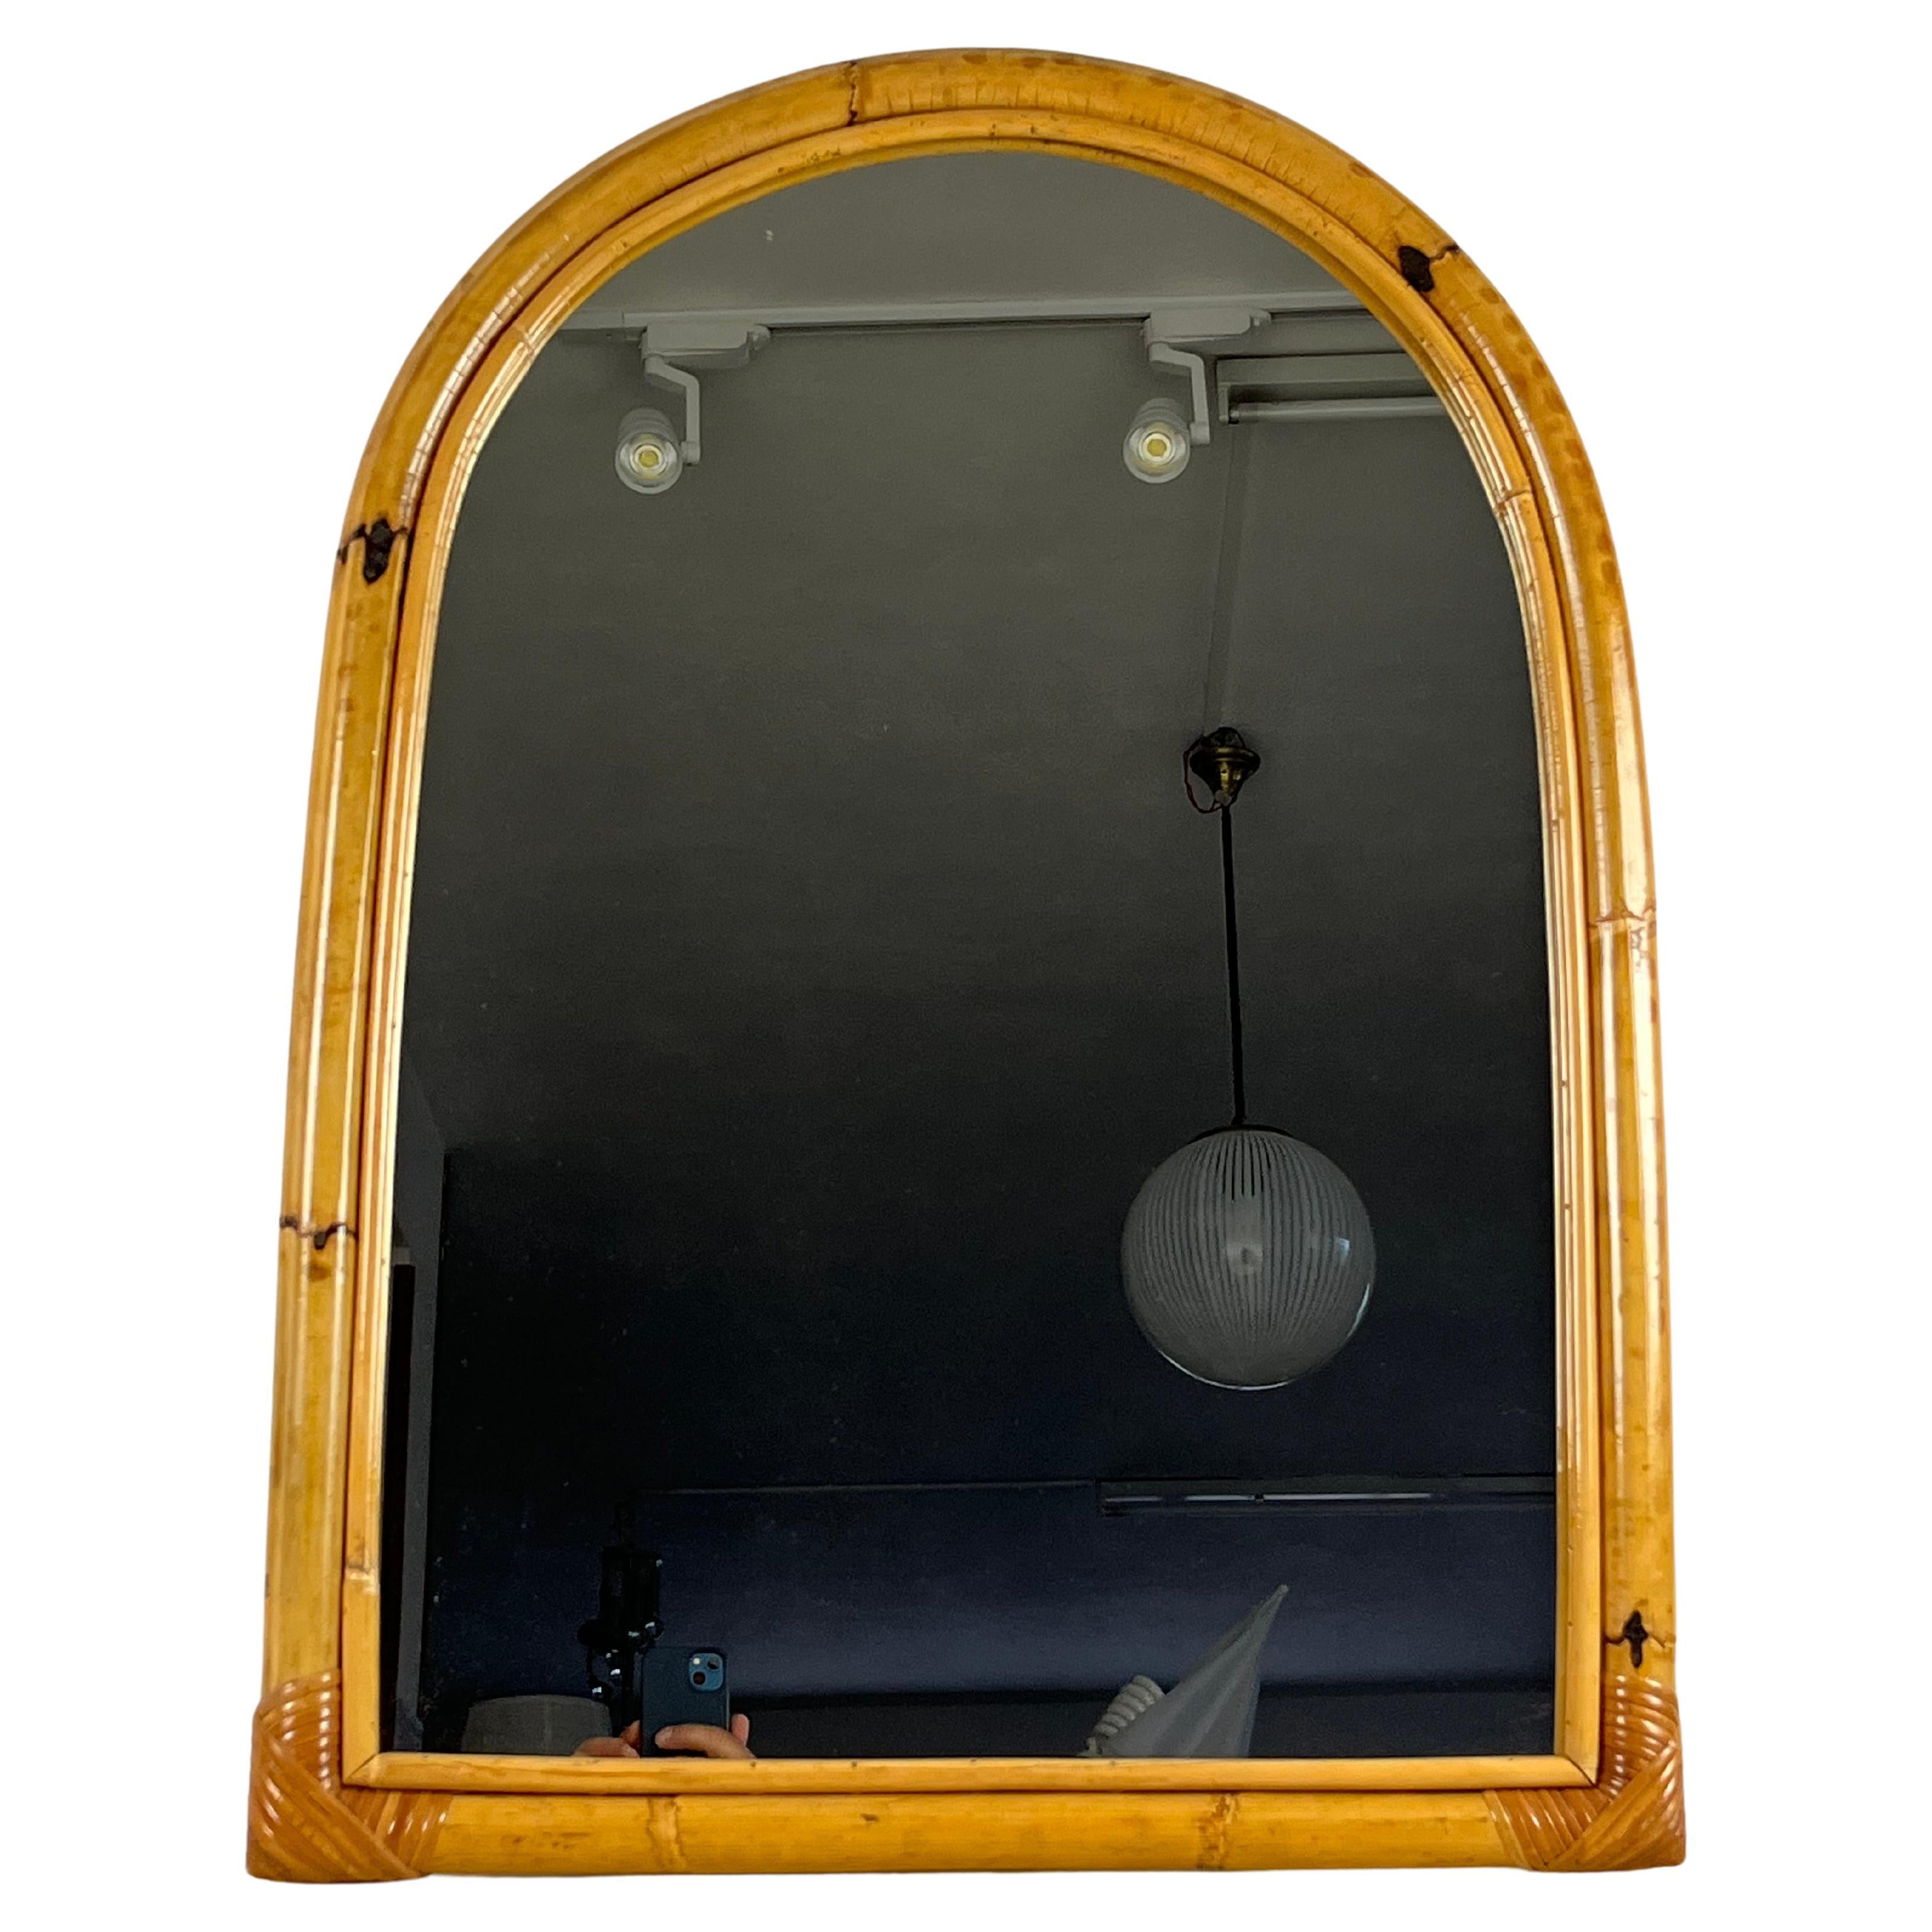 Arched bamboo mirror, Italy, 1970s
Purchased by my grandparents when they furnished the holiday home by the sea in 1971.
It is in excellent condition, small signs of wear.